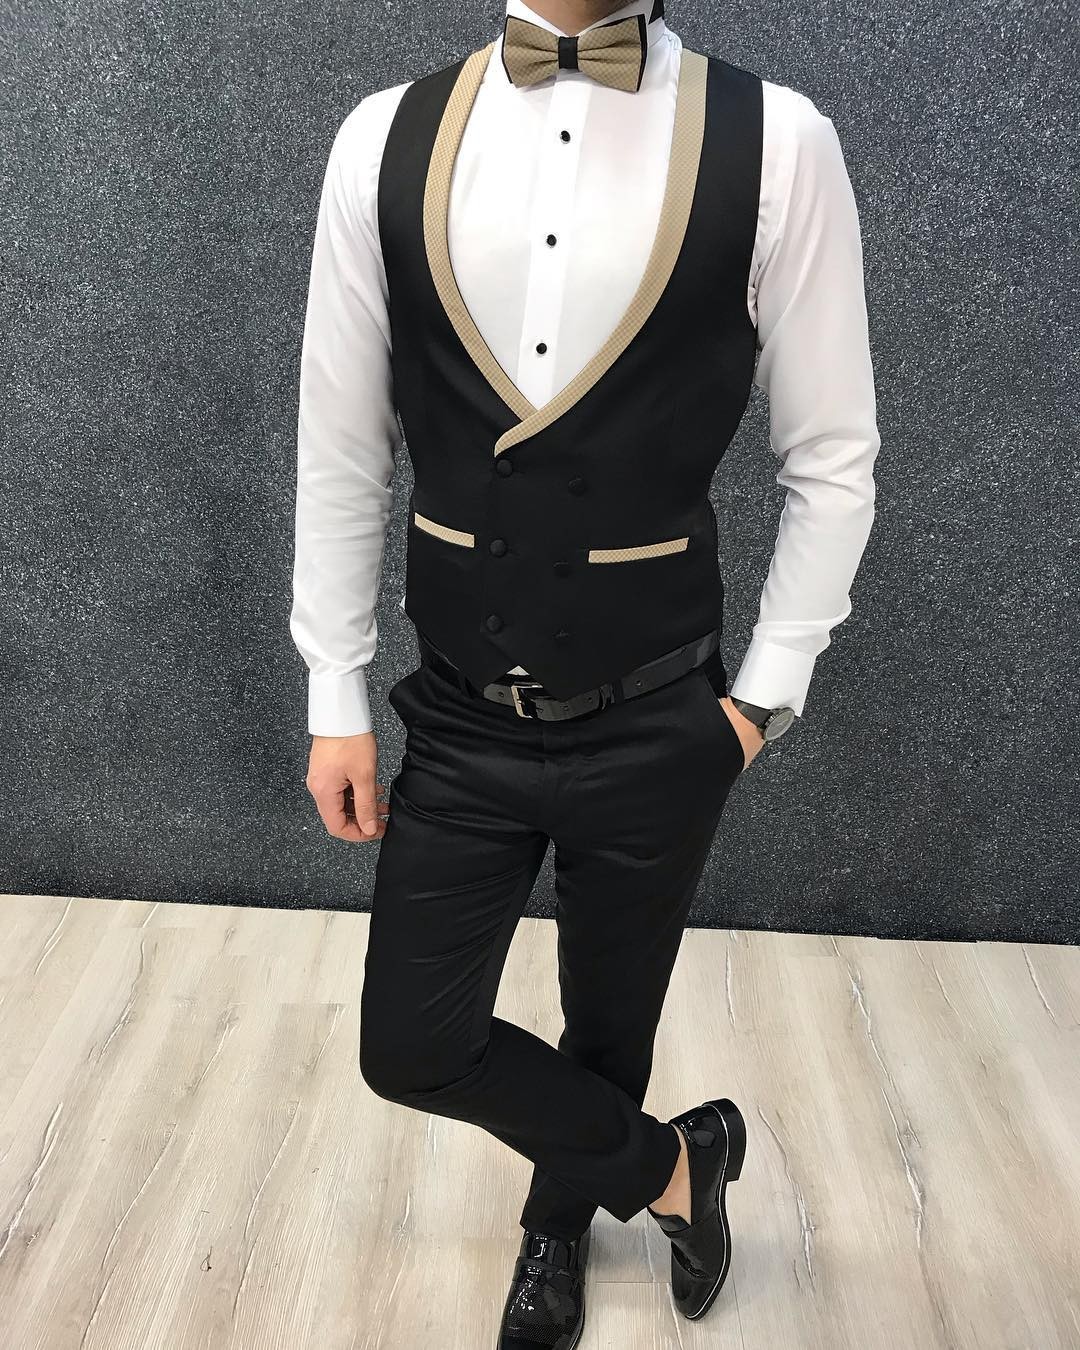 Buy Gold Slim Fit Tuxedo by Gentwith.com with Free Shipping